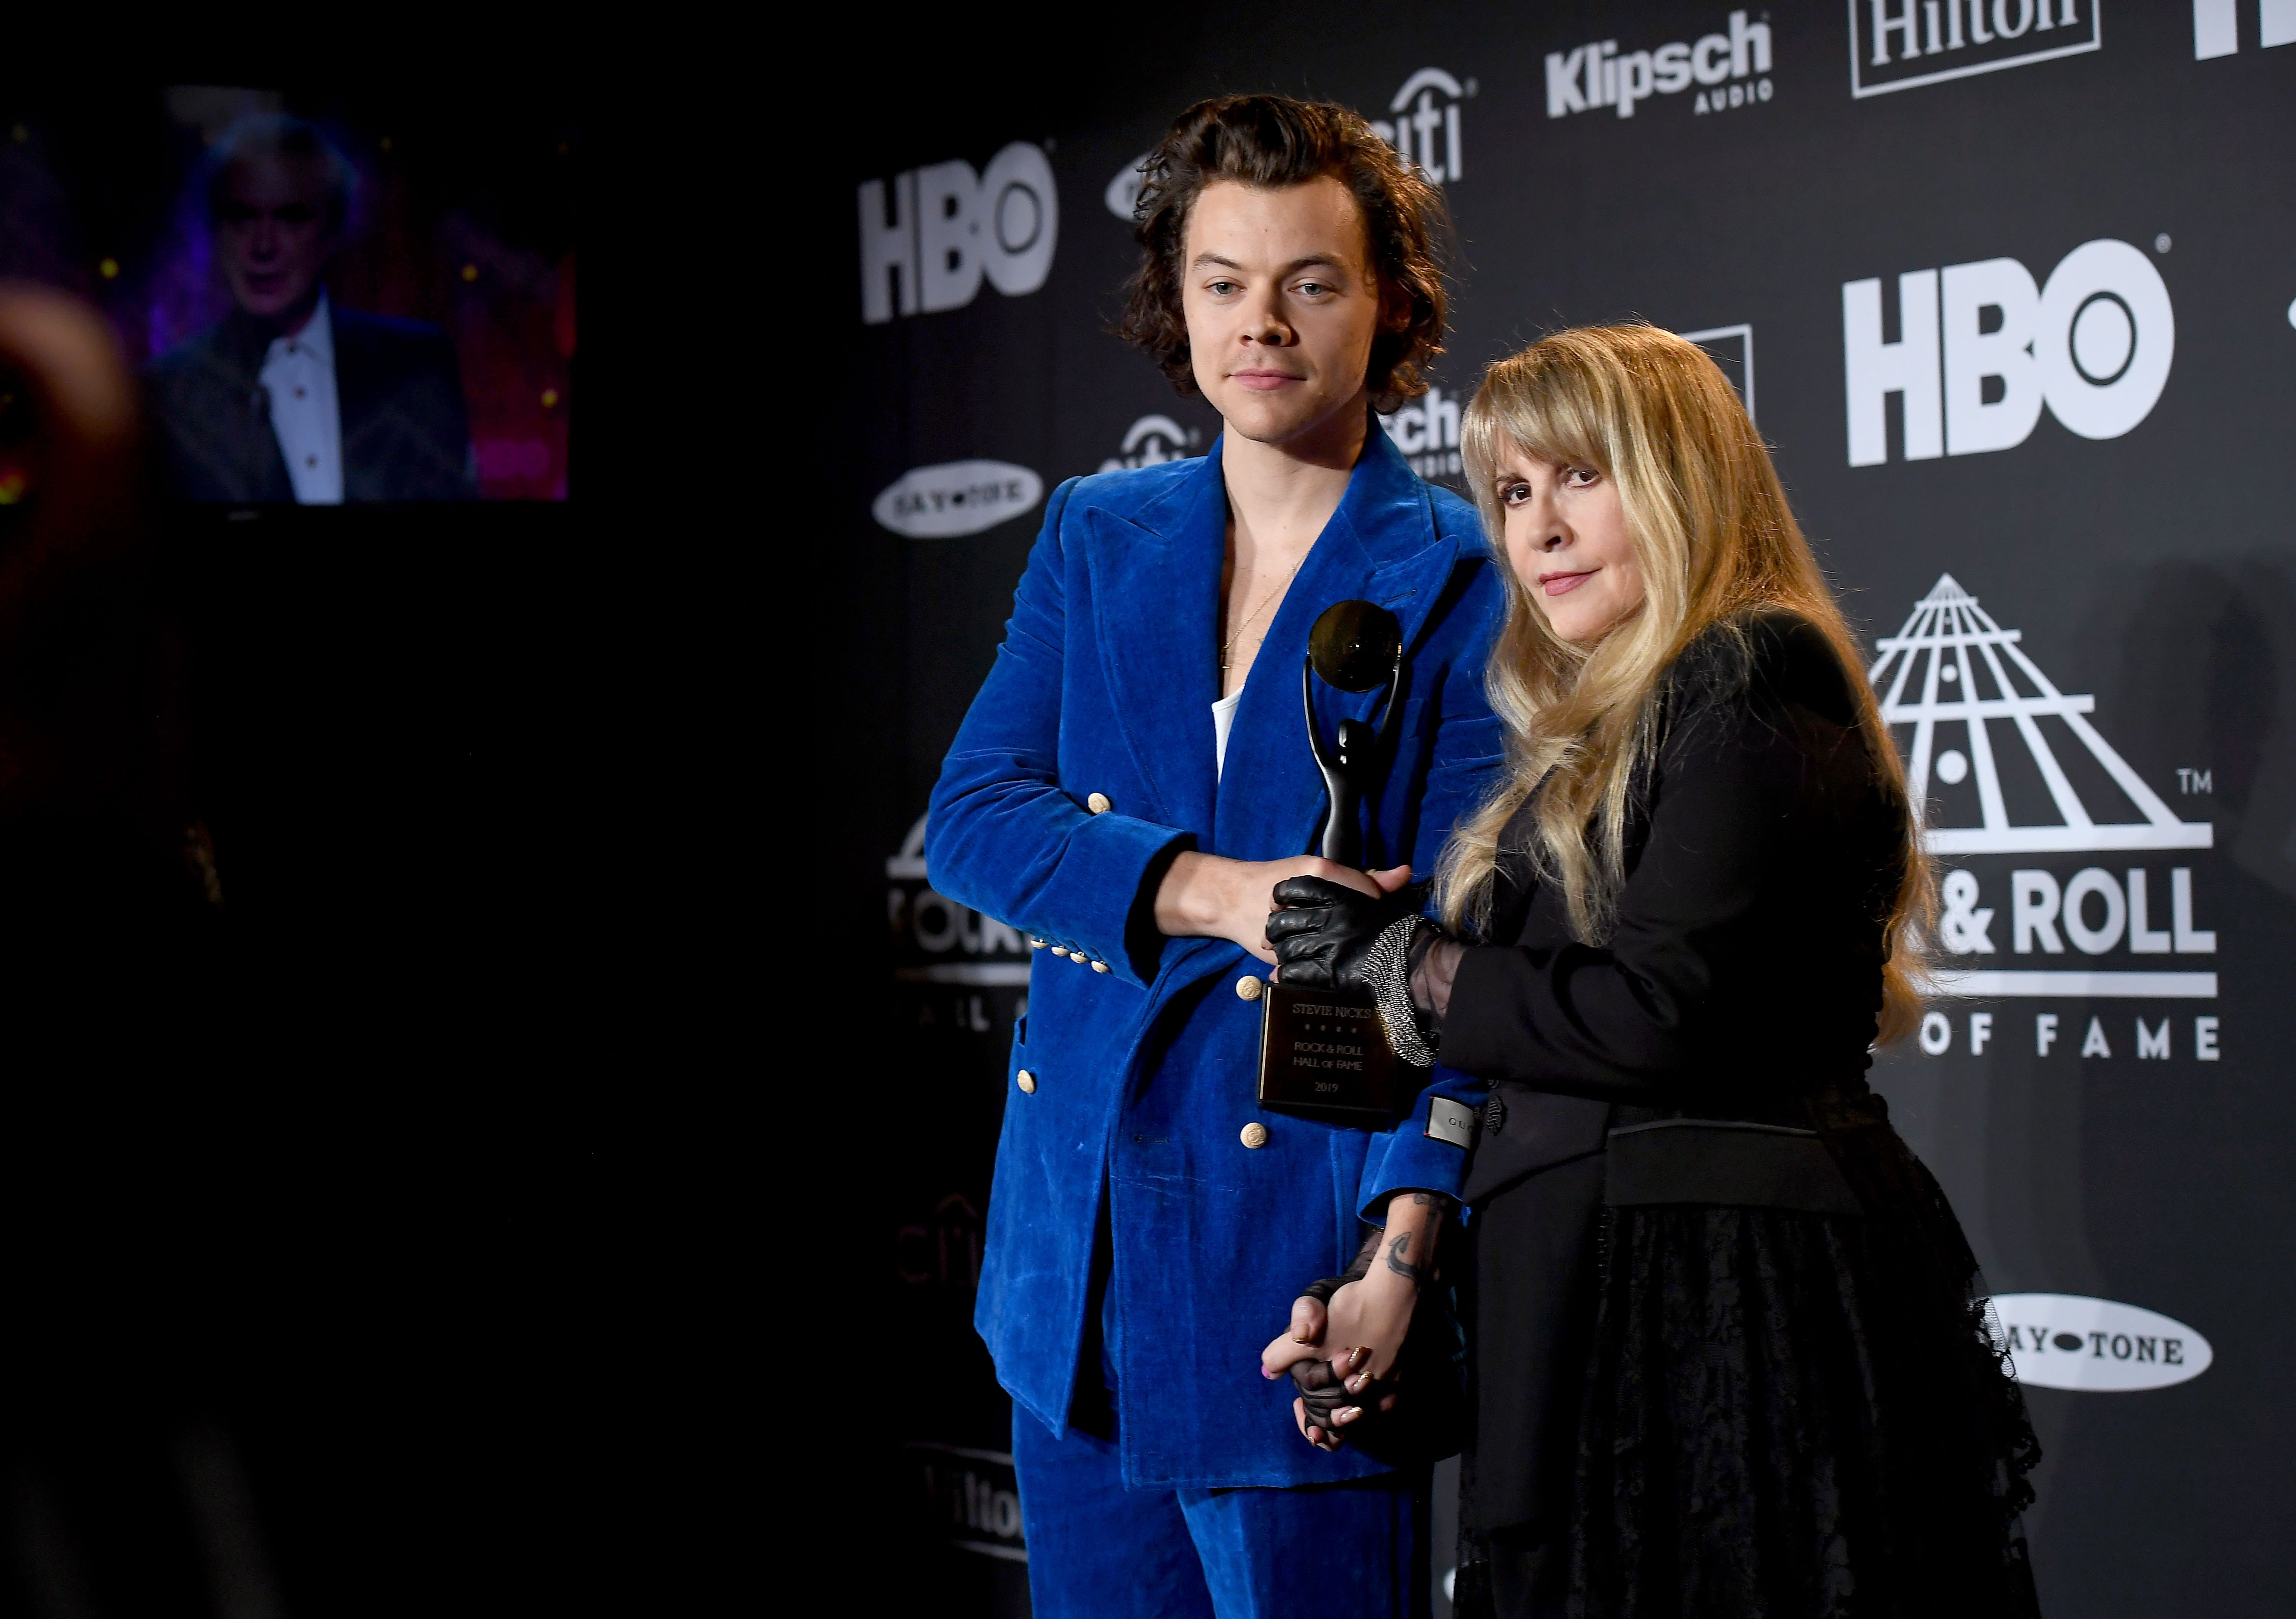 Stevie Nicks Welcomes Harry Styles During Huge London Show